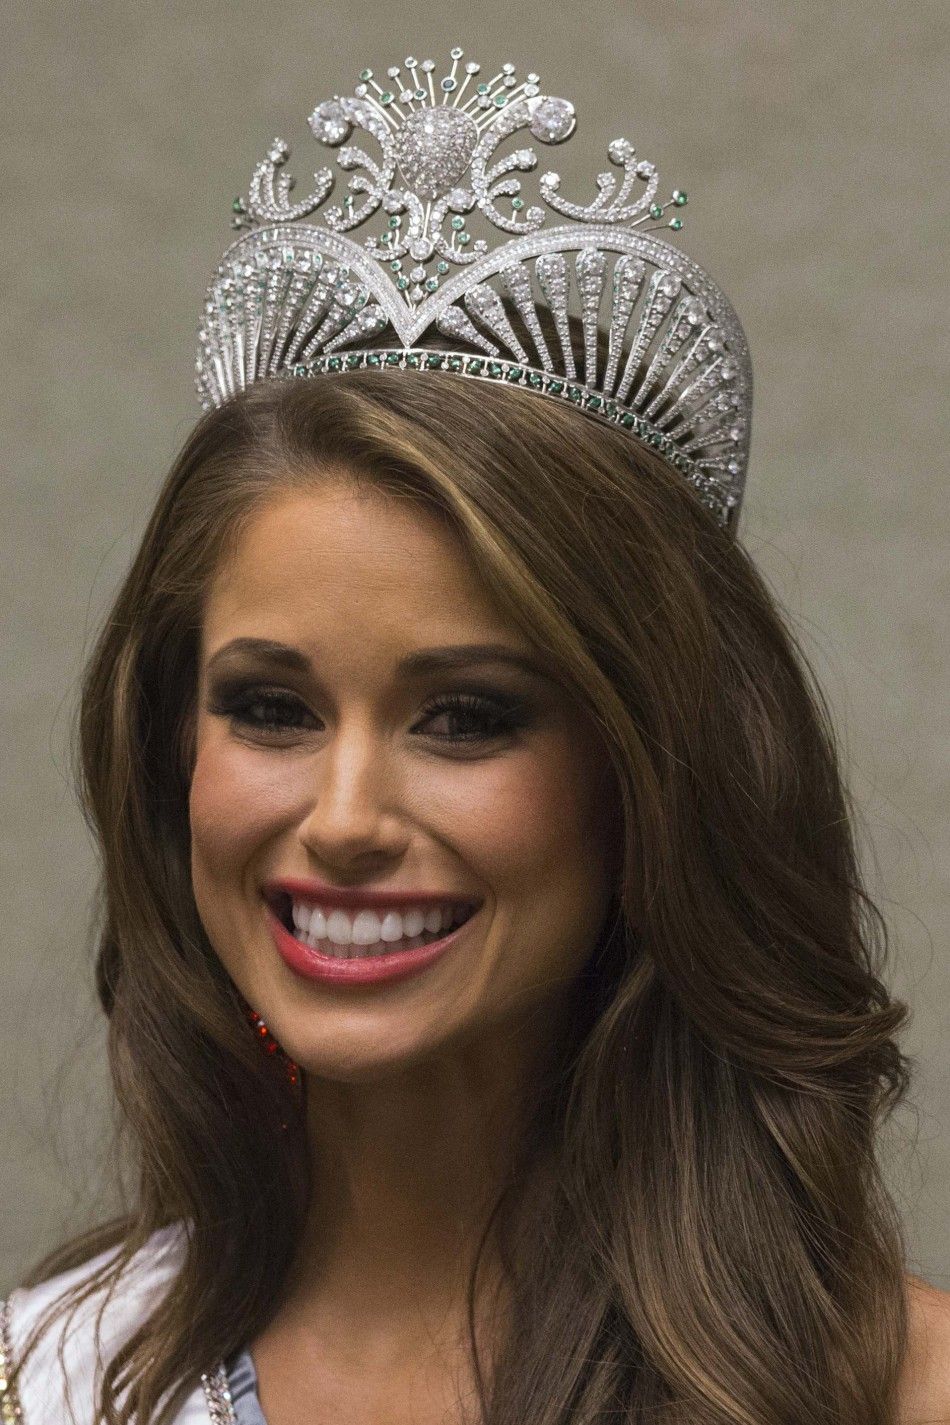 Miss Nevada Nia Sanchez arrives at a news conference after winning the 2014 Miss USA beauty pageant in Baton Rouge, Louisiana